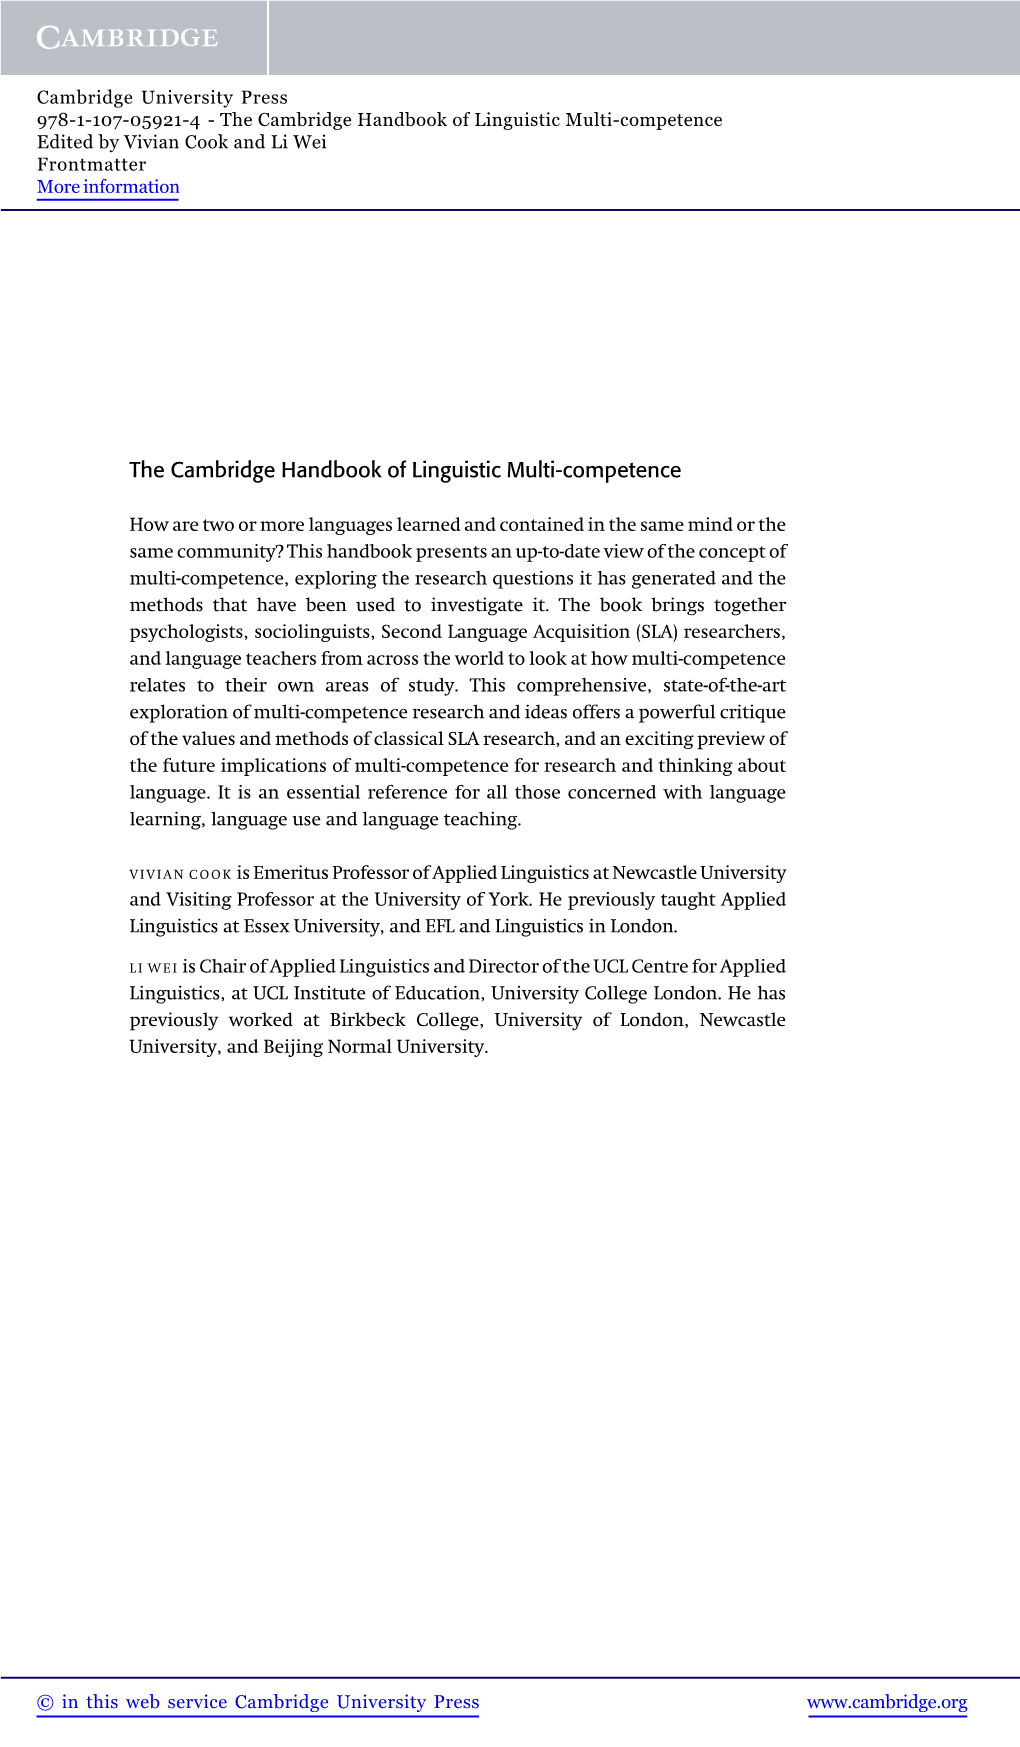 The Cambridge Handbook of Linguistic Multi-Competence Edited by Vivian Cook and Li Wei Frontmatter More Information